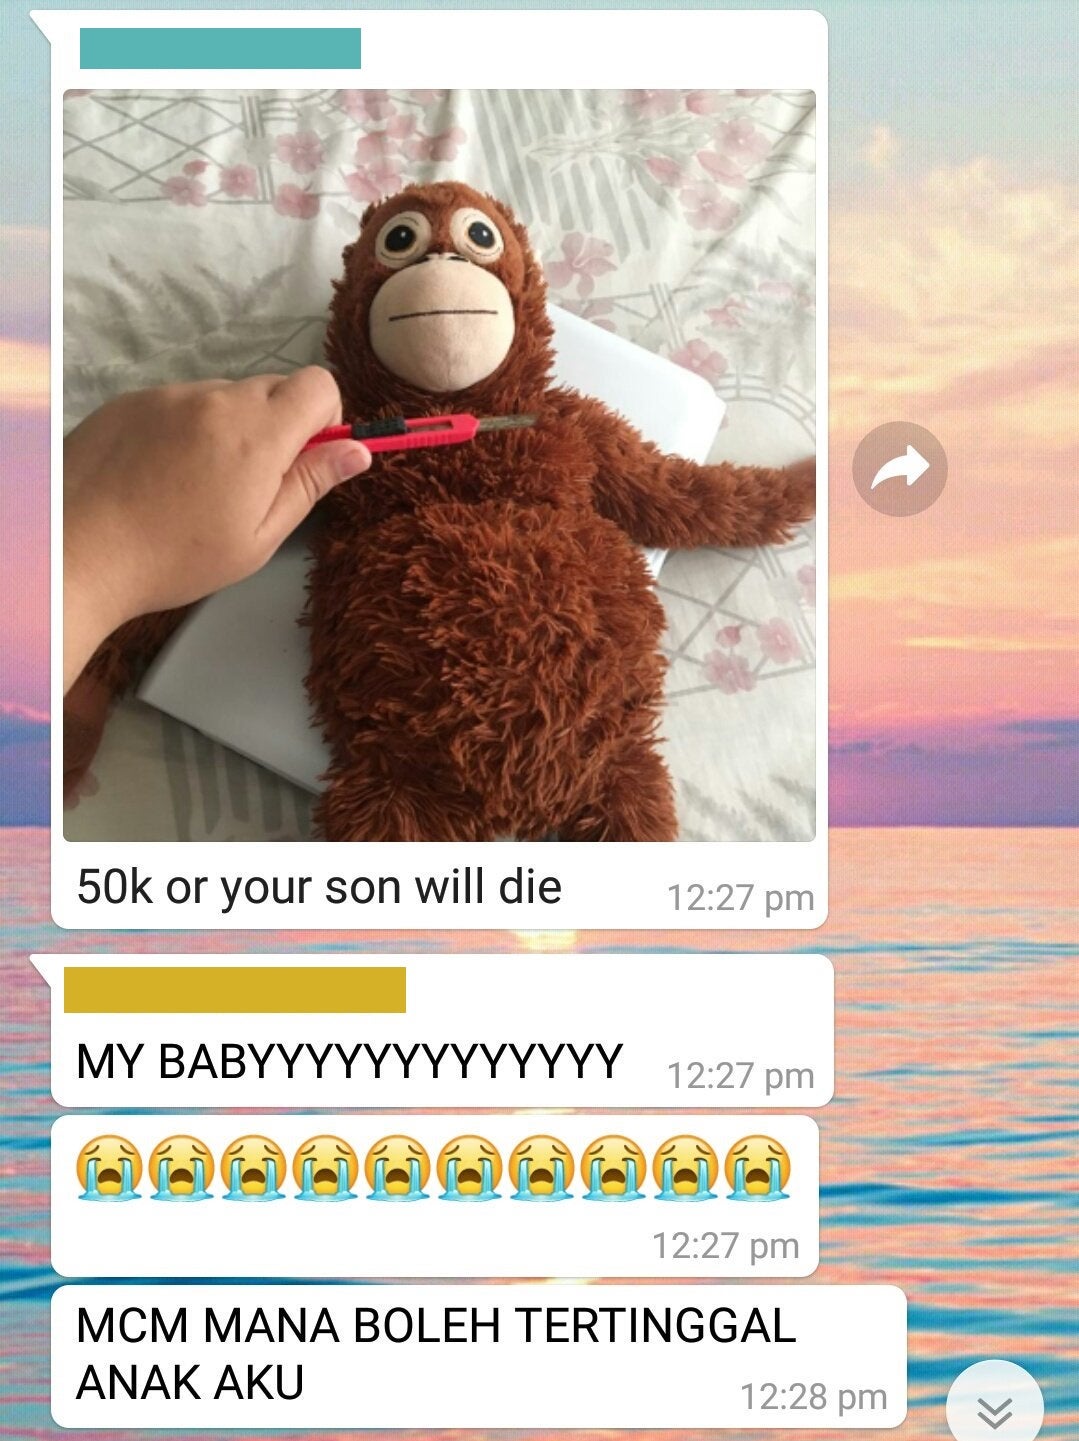 M'sian Woman's Screenshots Shows Hilarious Play-by-Play "Kid"napping - WORLD OF BUZZ 1